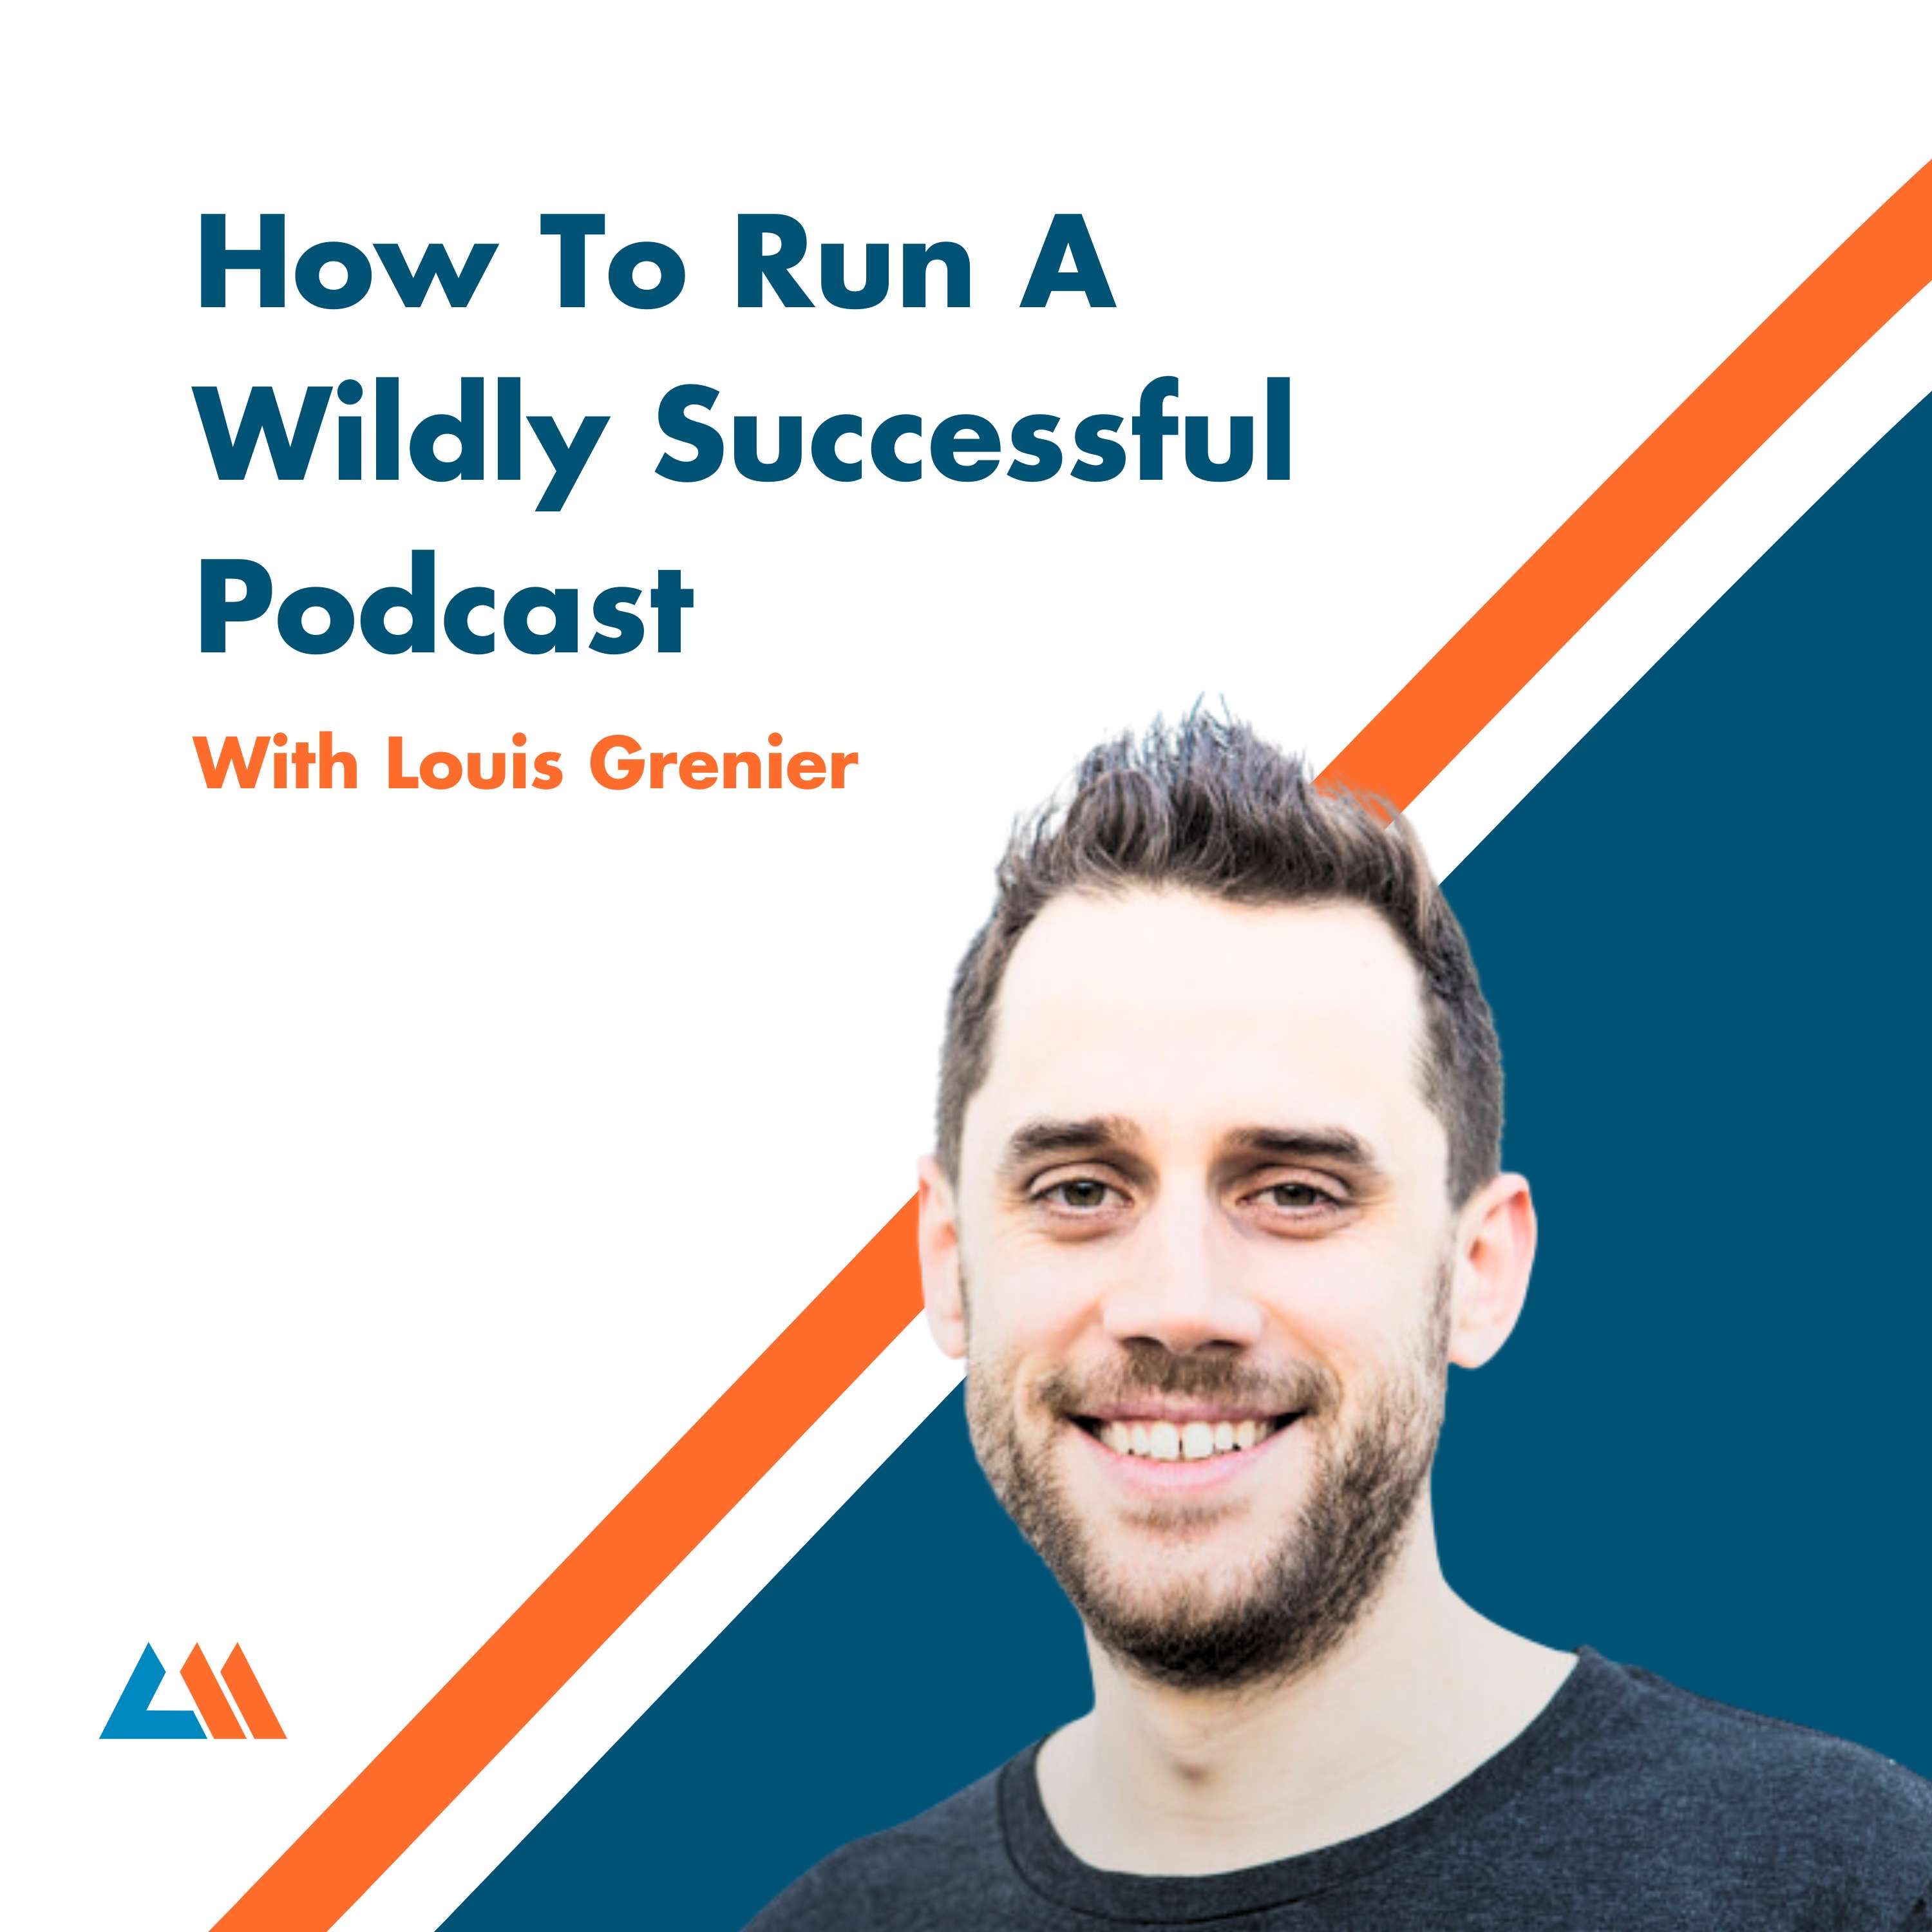 How To Run A Wildly Successful Podcast With Louis Grenier